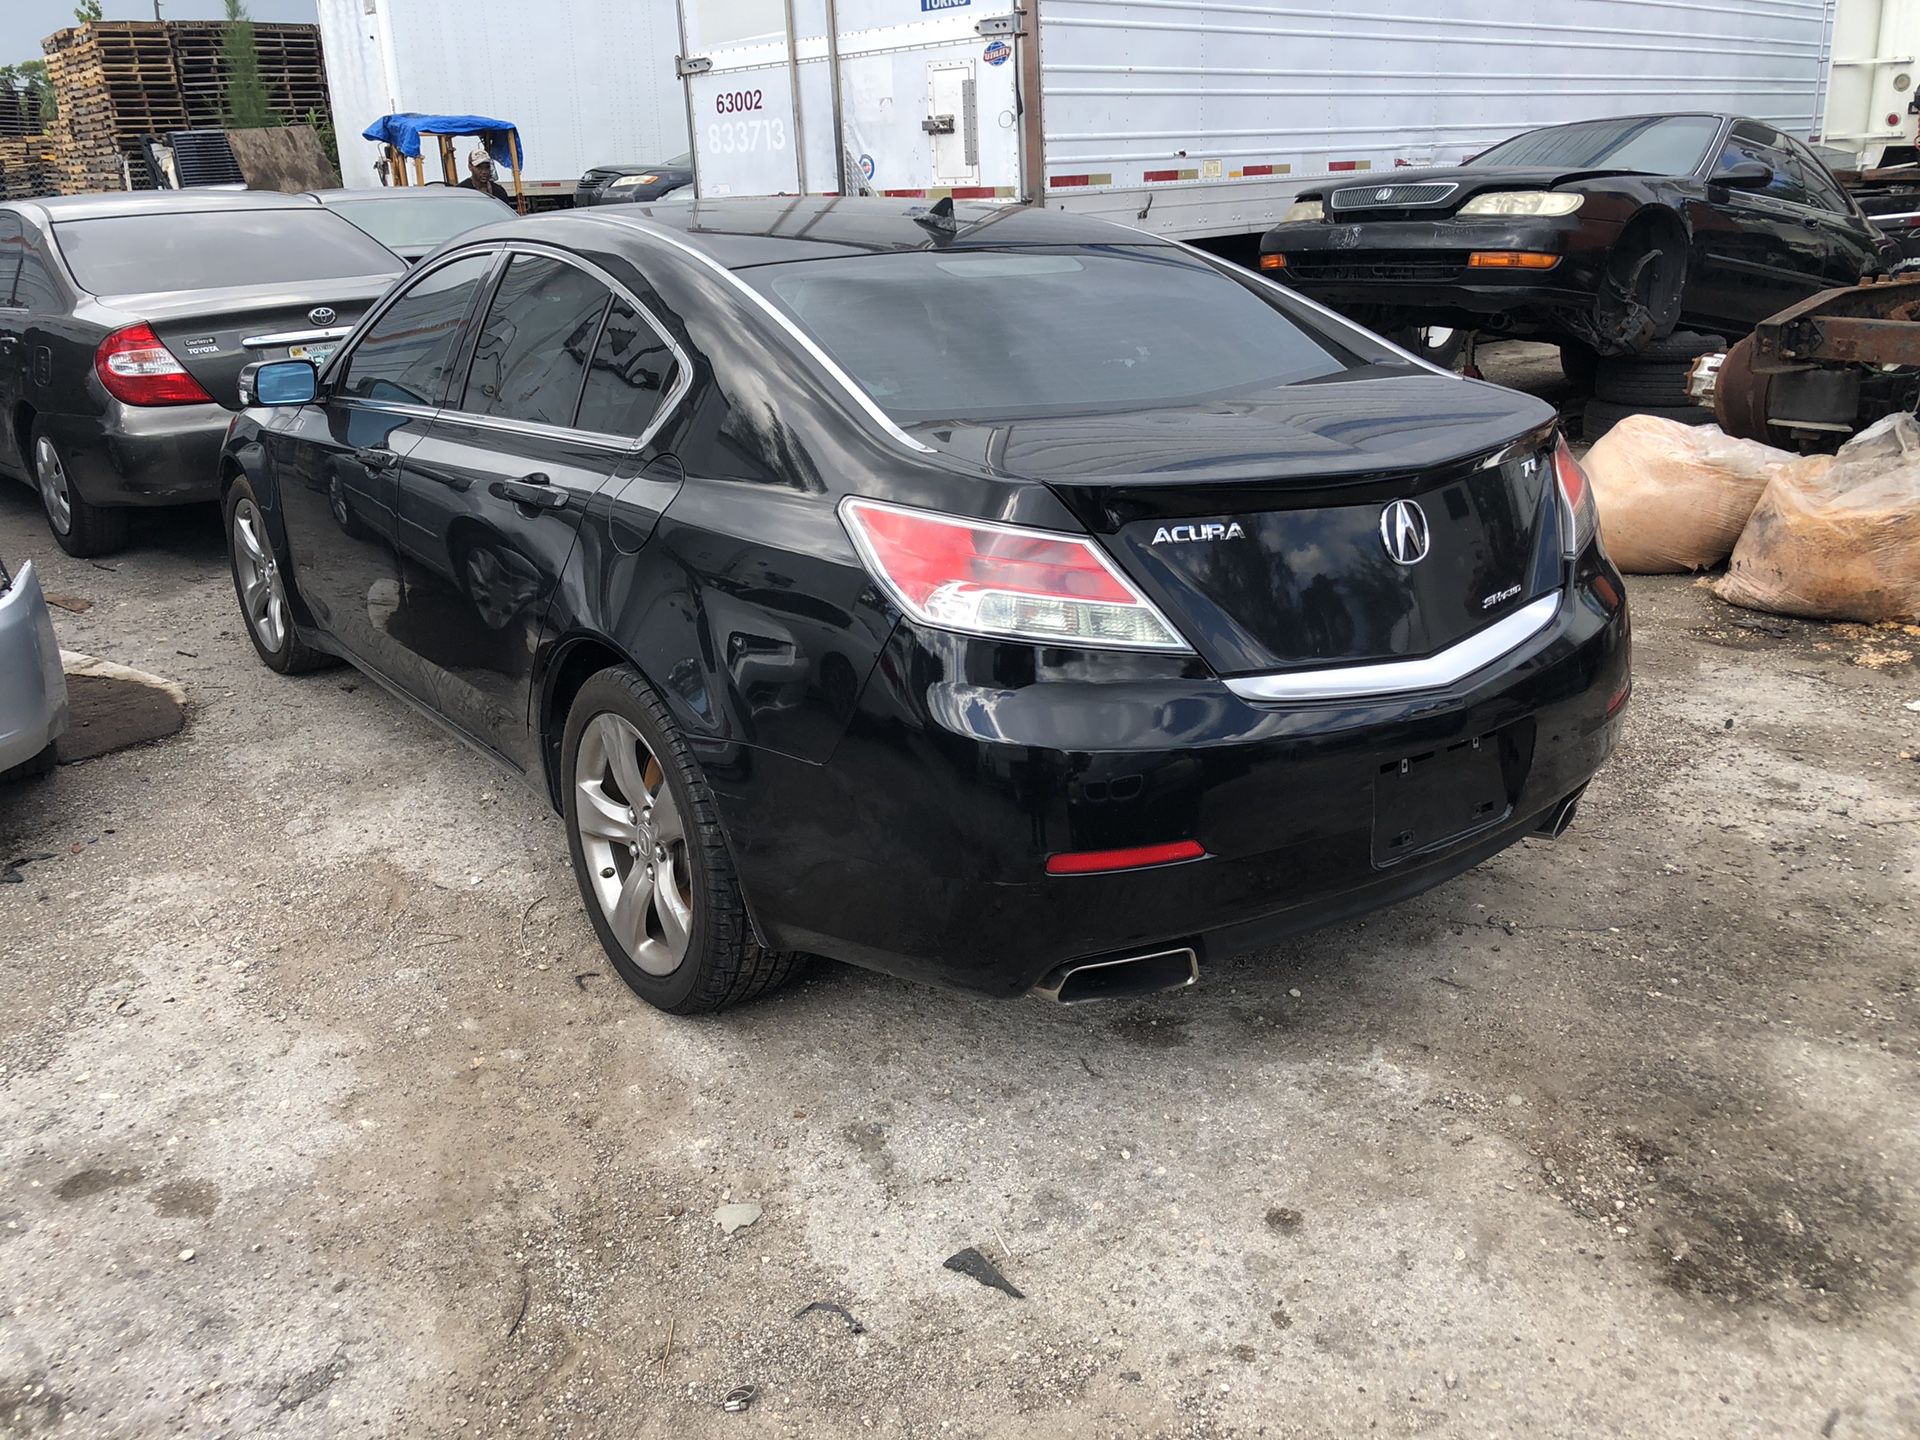 2012 Acura TL for parts.